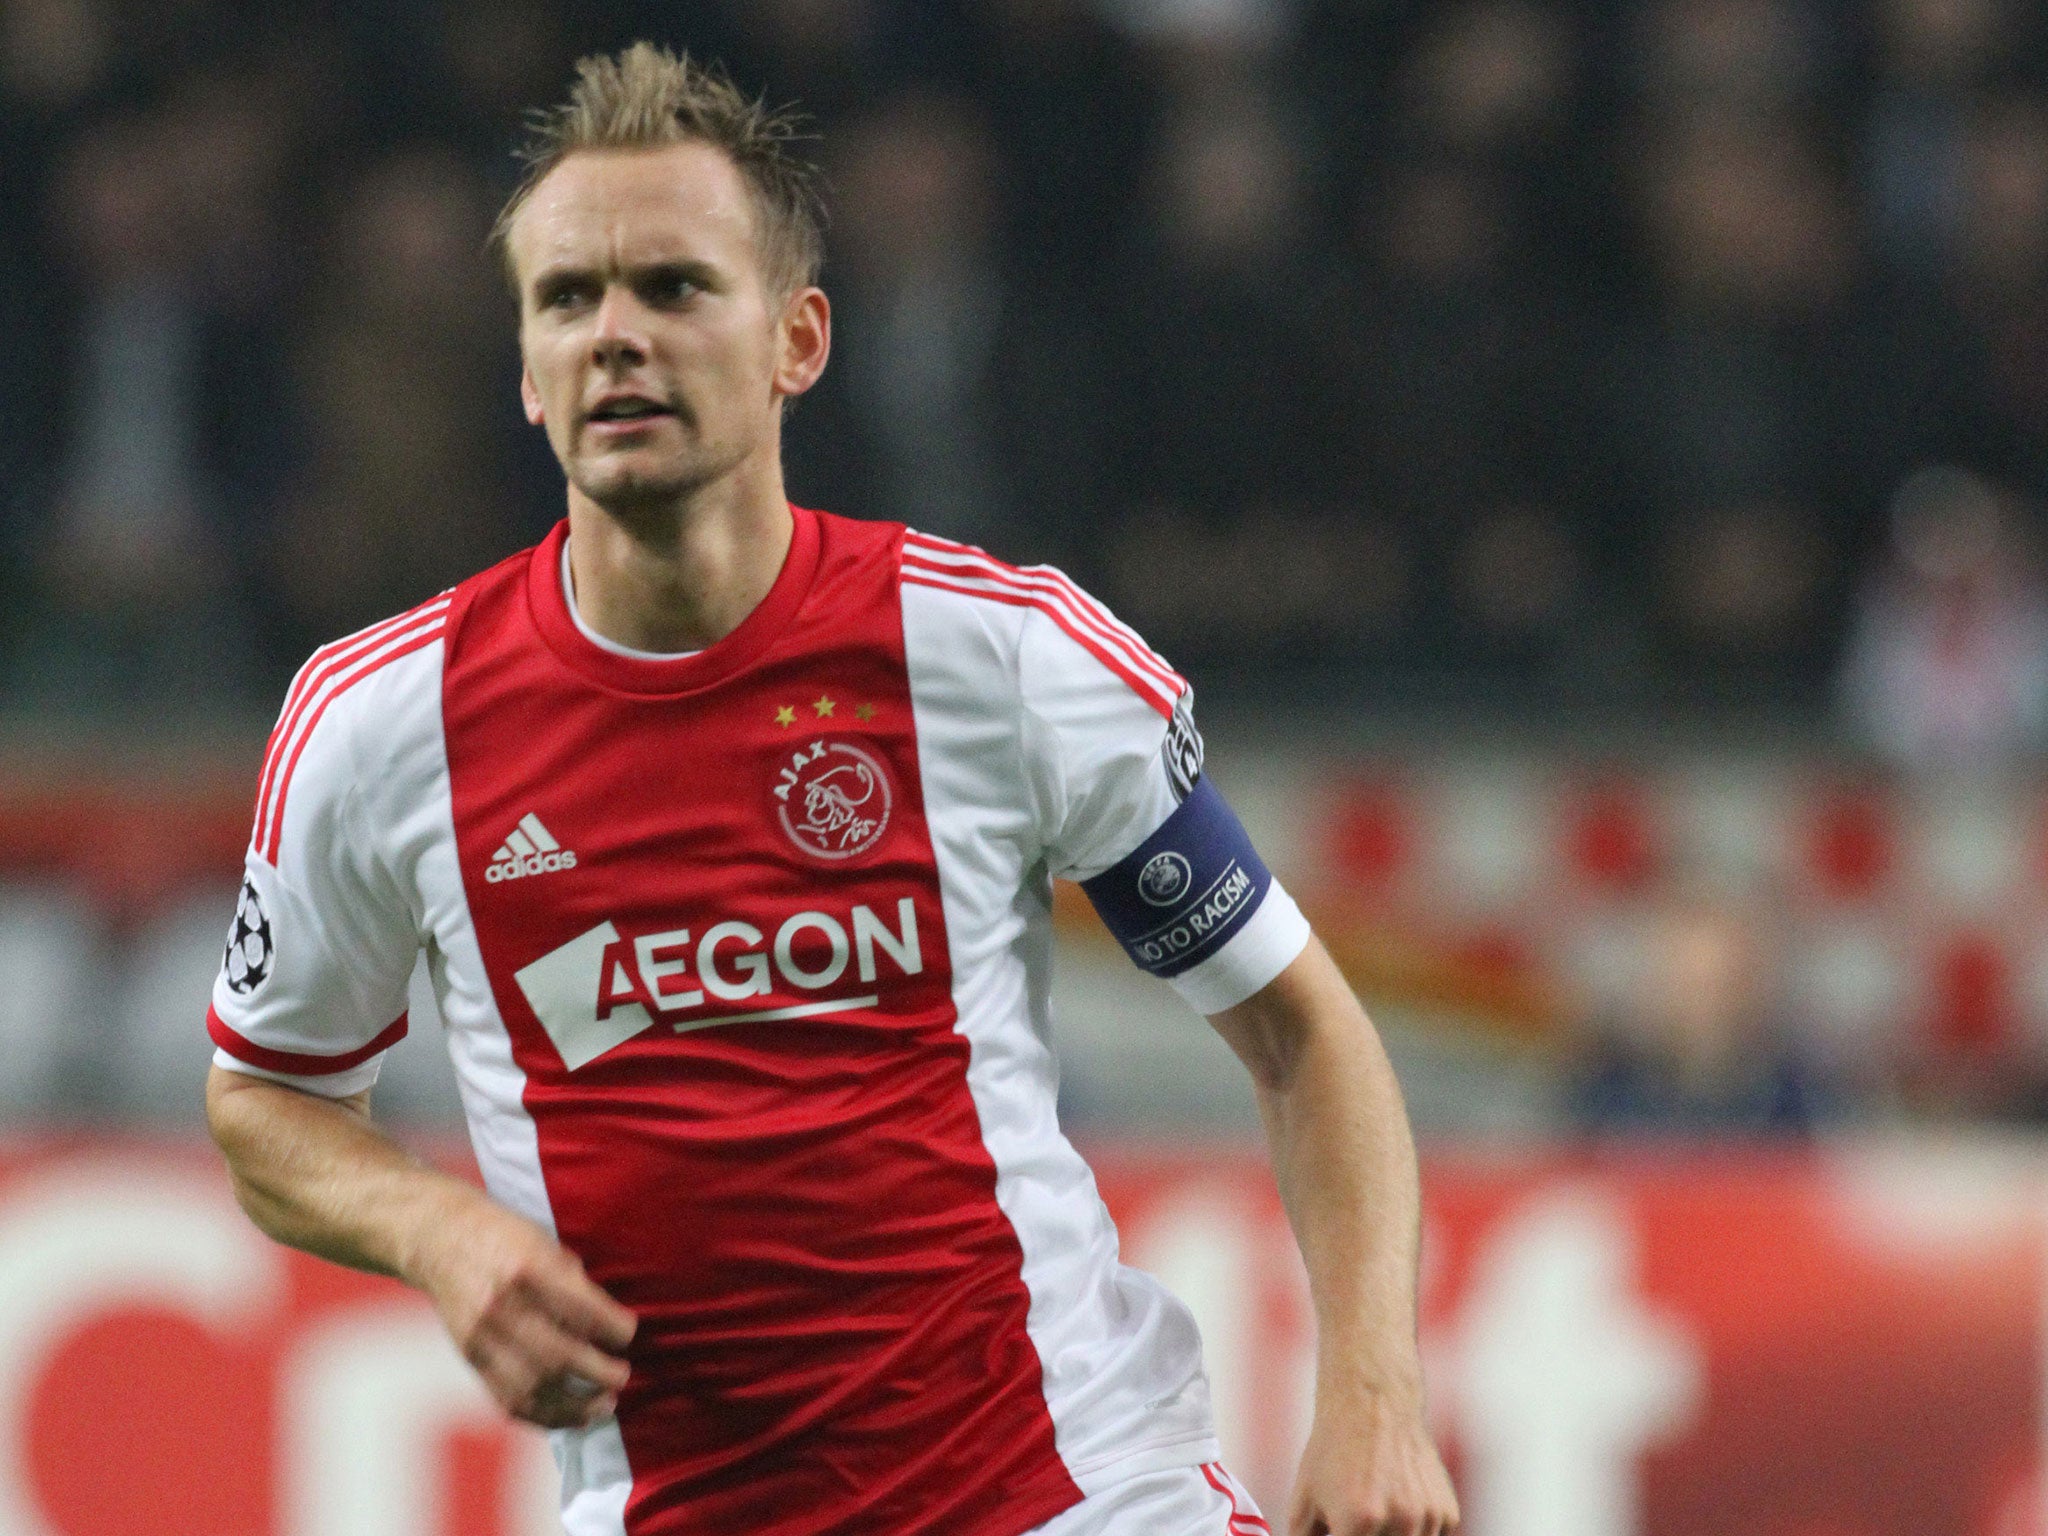 Ajax captain Siem de Jong has completed a transfer to Newcastle